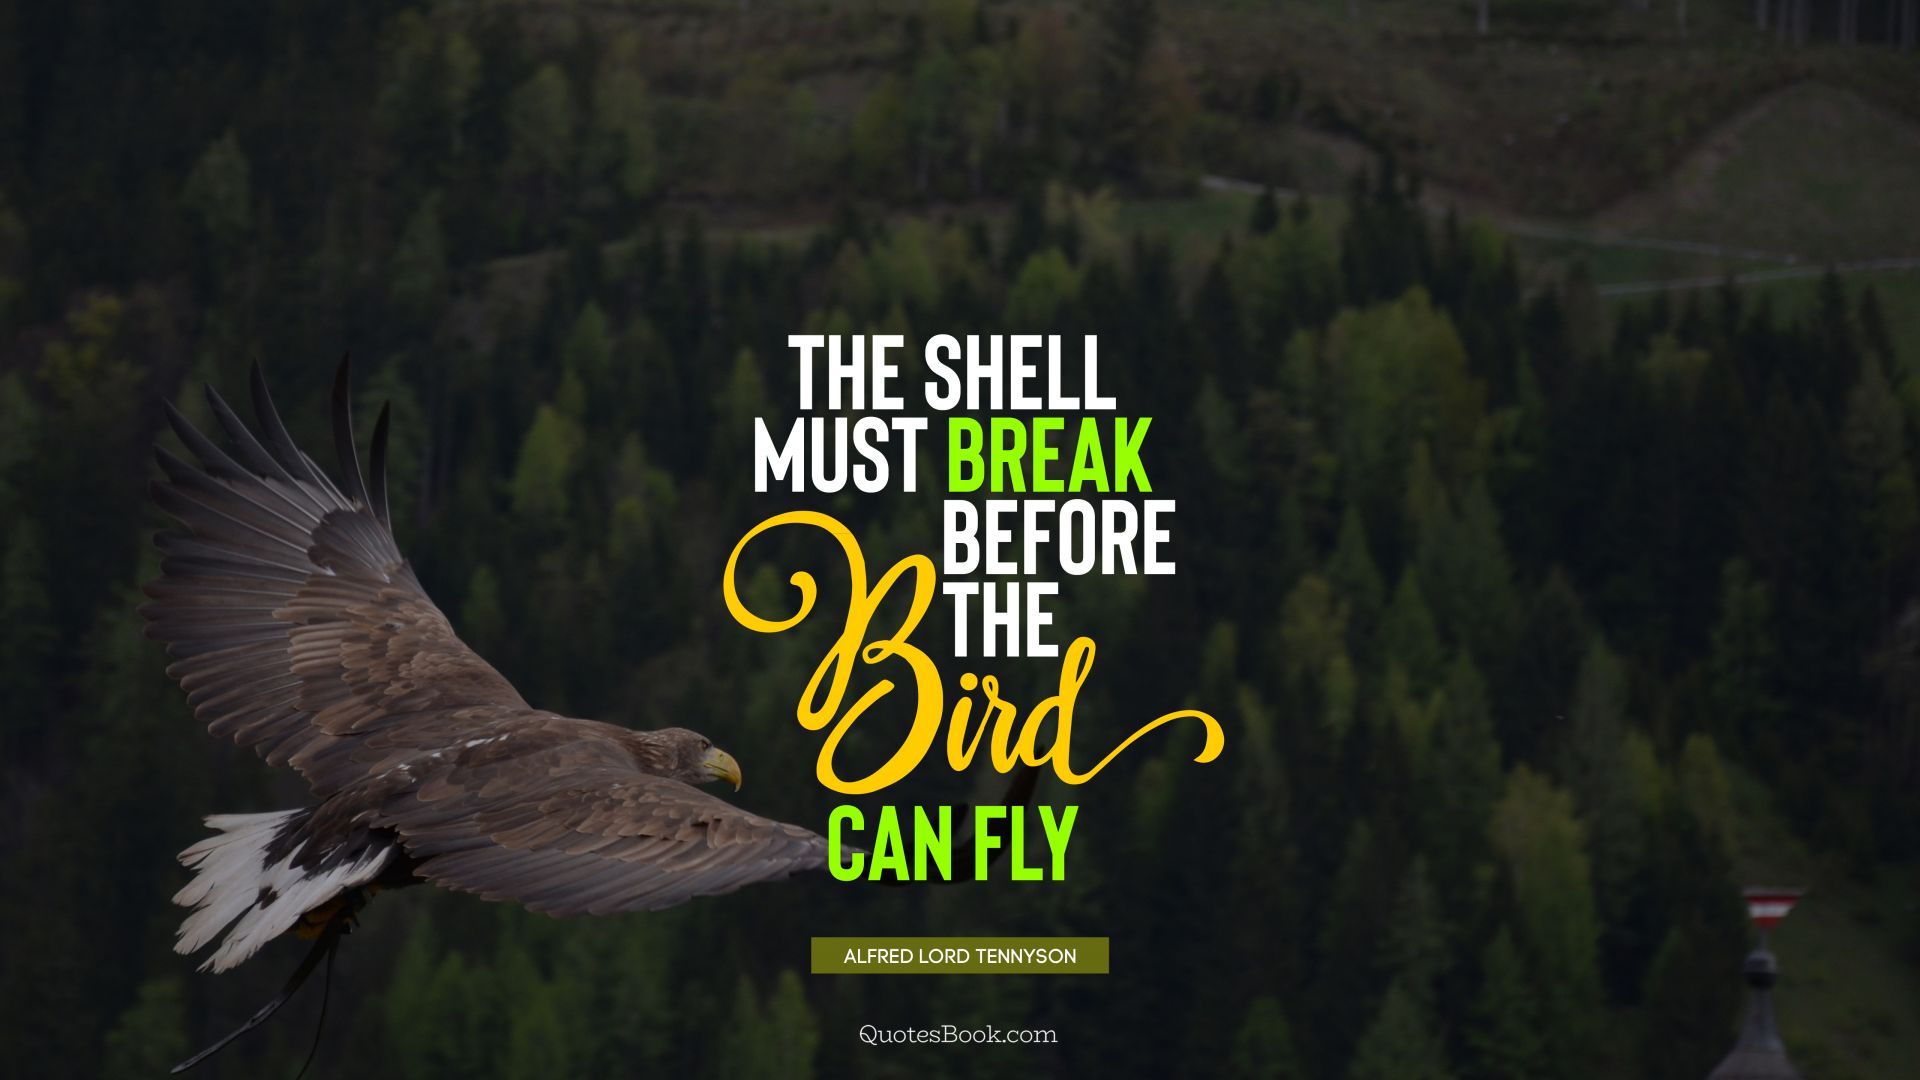 The shell must break before the bird can fly. - Quote by Alfred Lord Tennyson